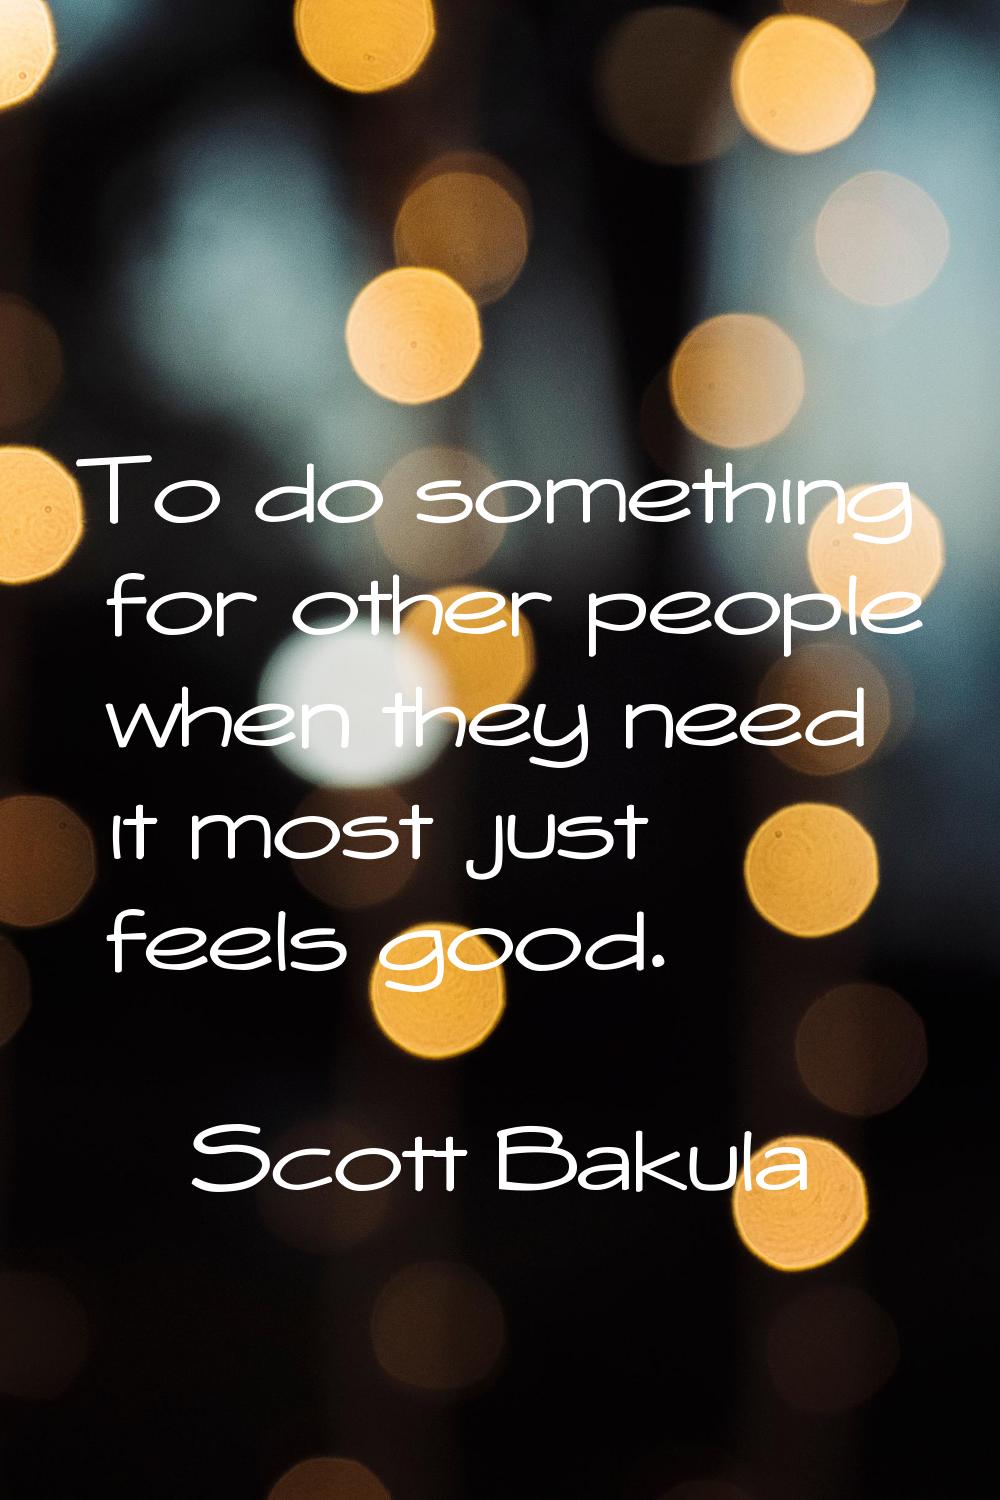 To do something for other people when they need it most just feels good.